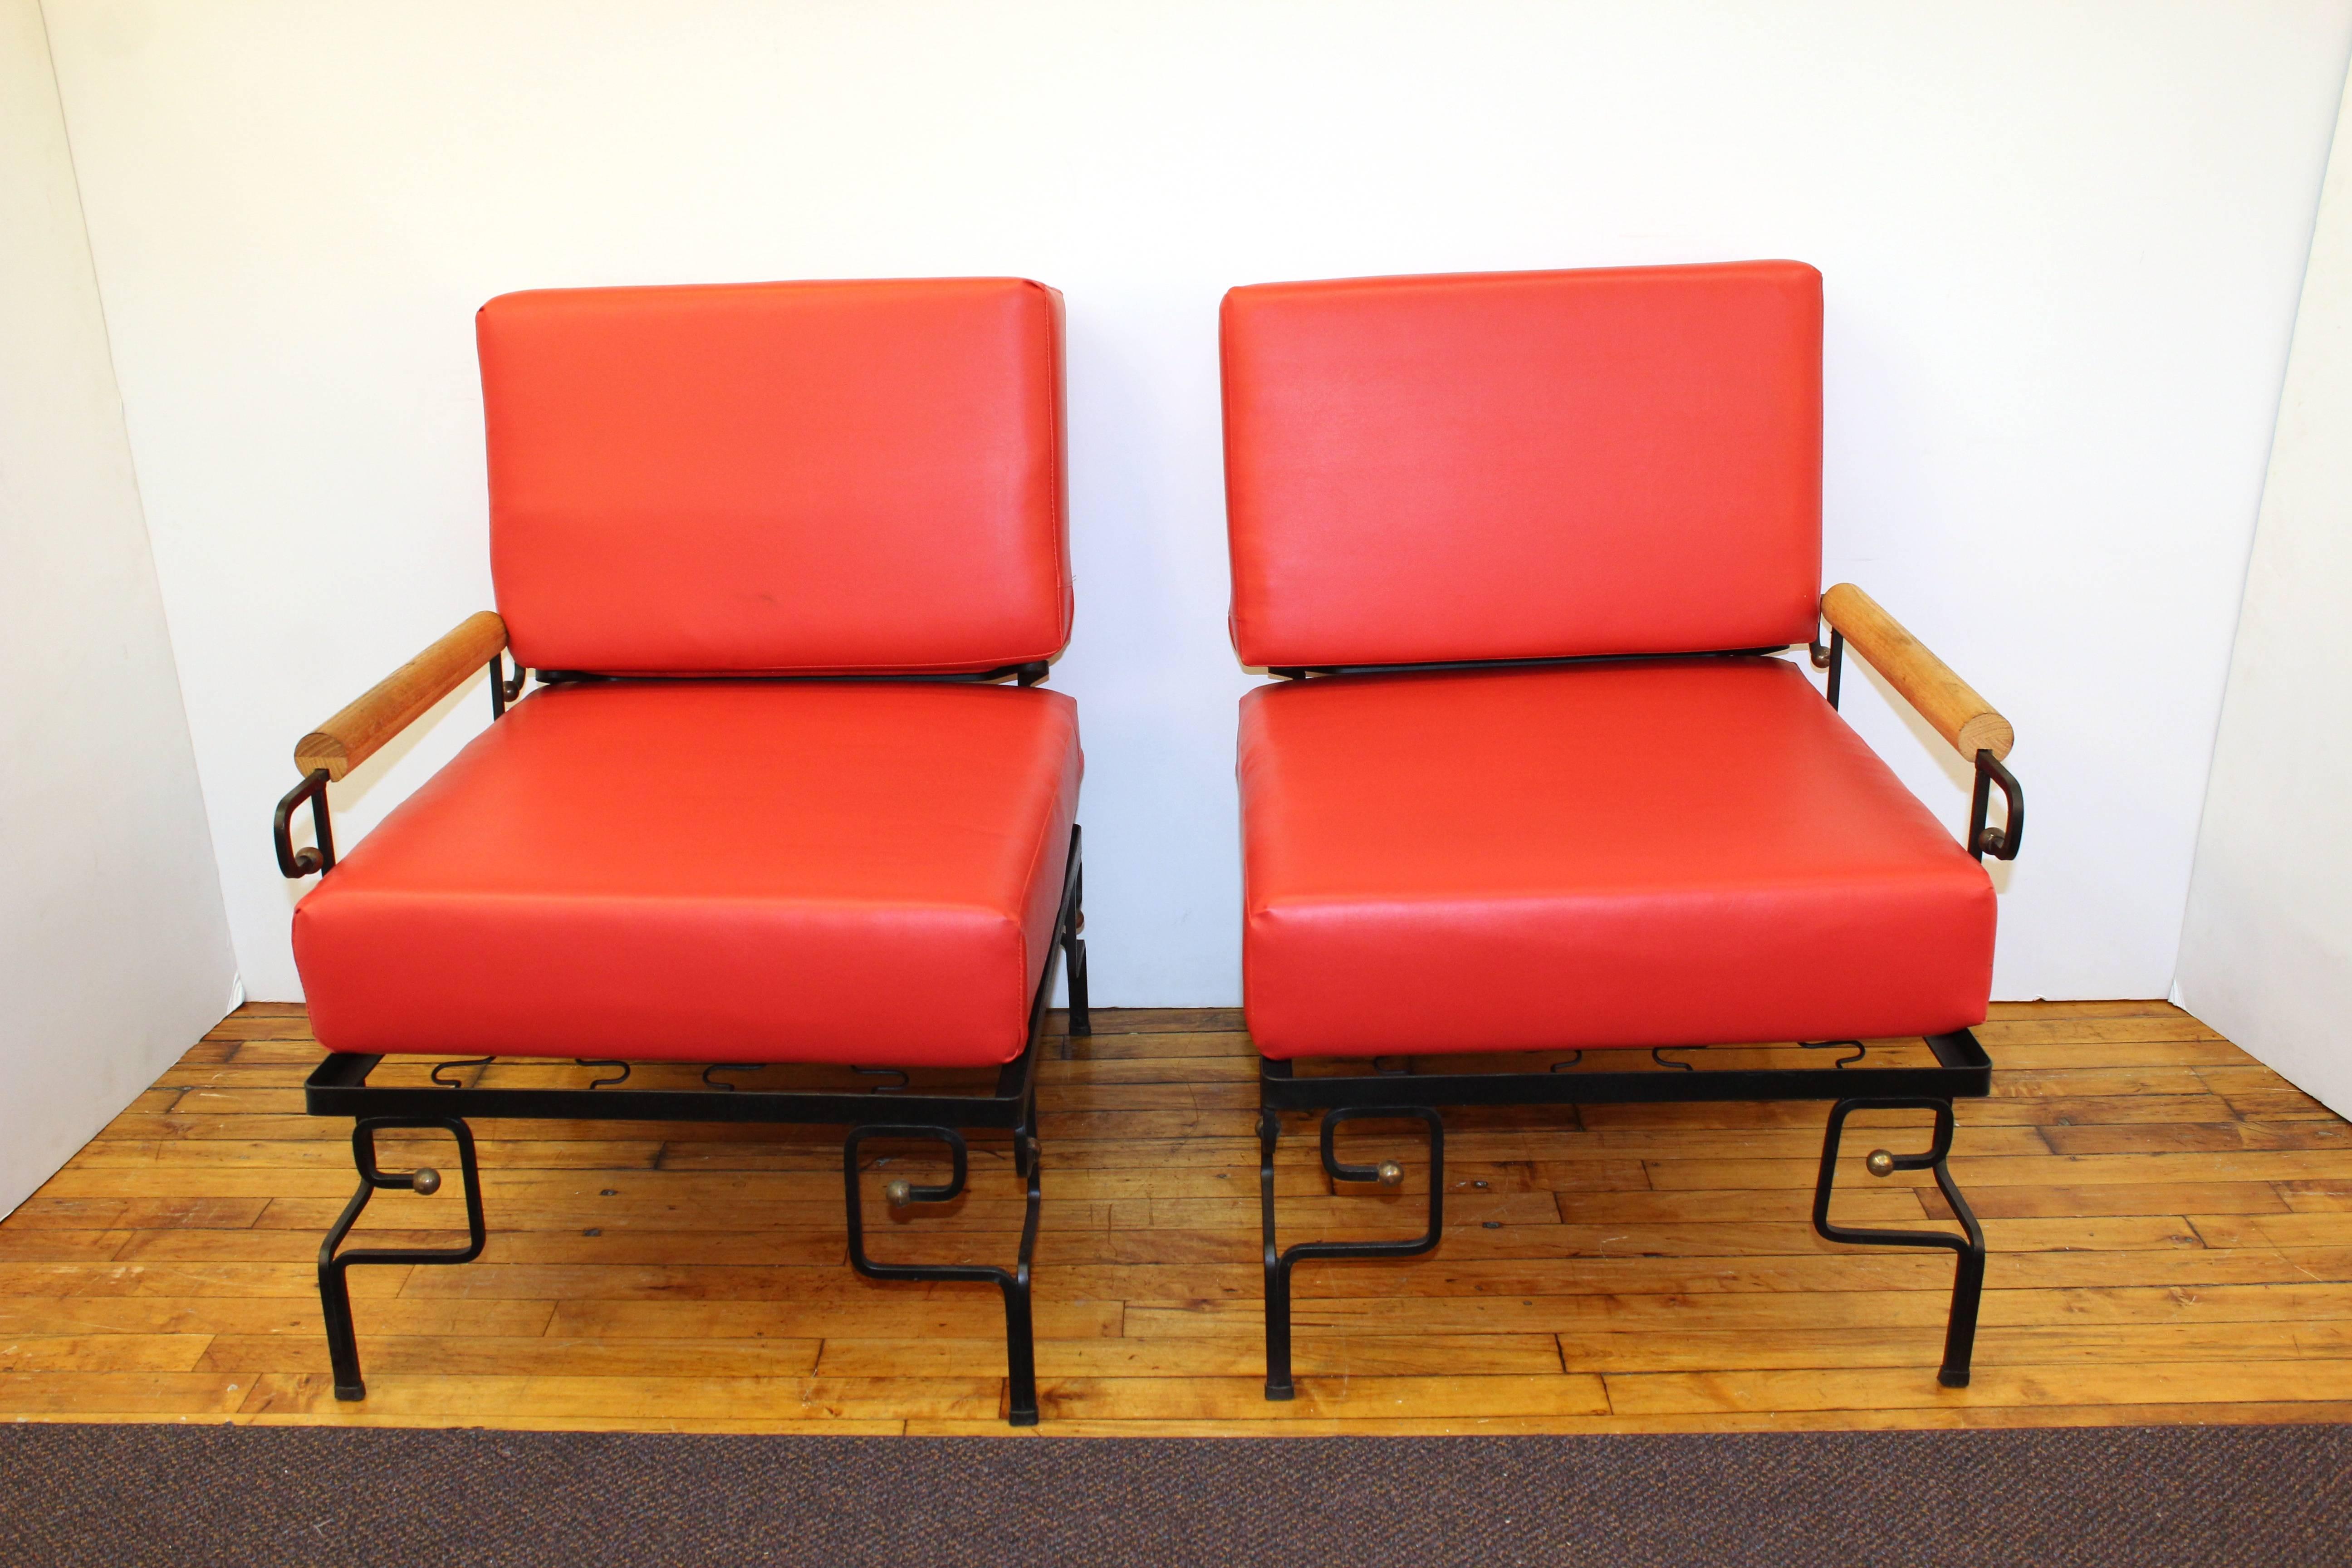 This Mid-Century Modern loveseat set by Wroughtan for Ritts is made out of iron and wood with red upholstery. The loveseat can be separated into two separate, free-standing chairs. There is some gold paint detailing to the iron base. In good vintage